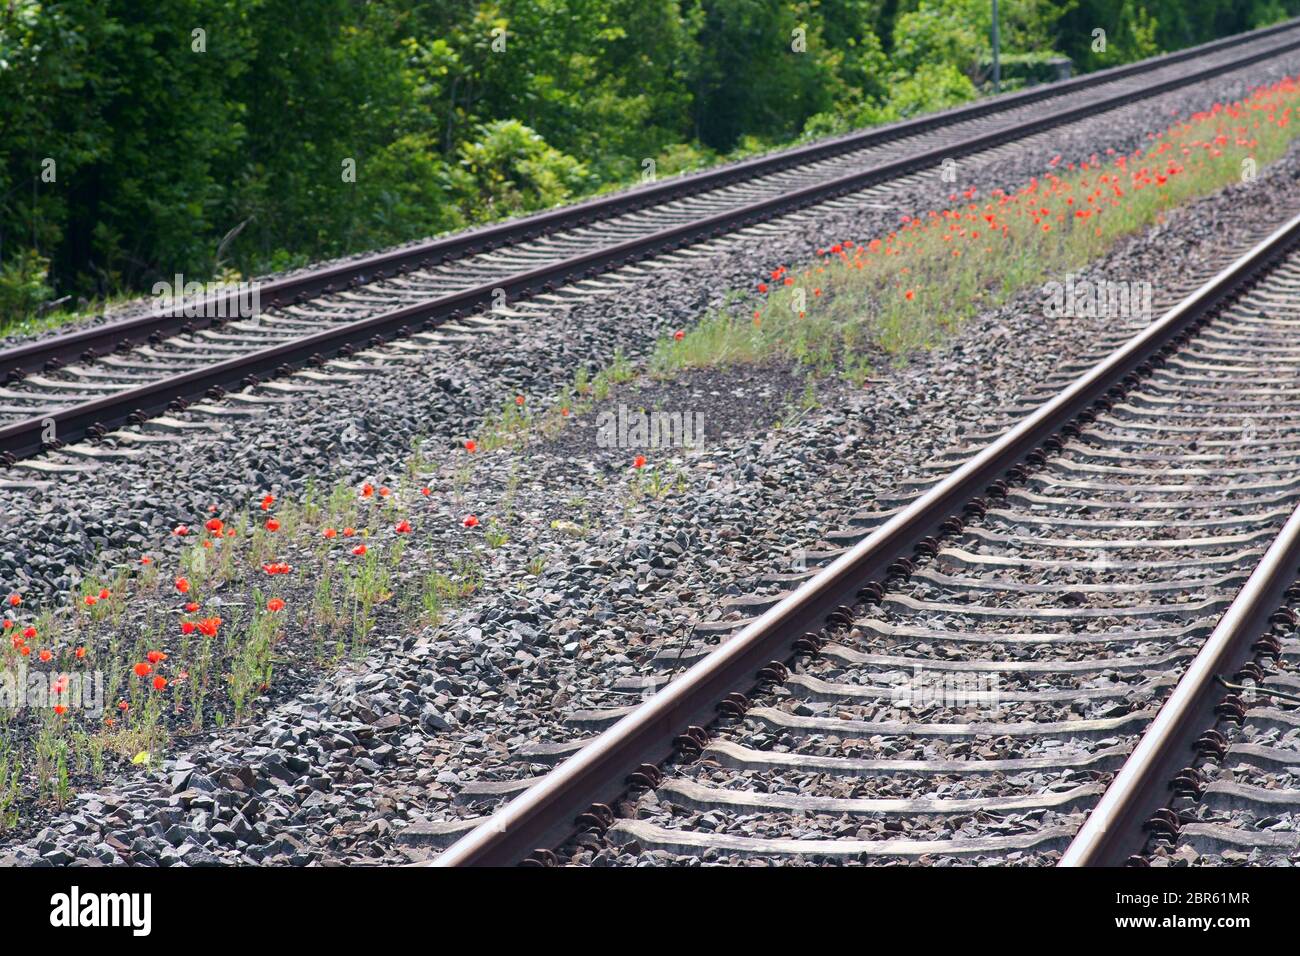 A flower meadow with poppies between the railroad tracks of a village train station. Stock Photo